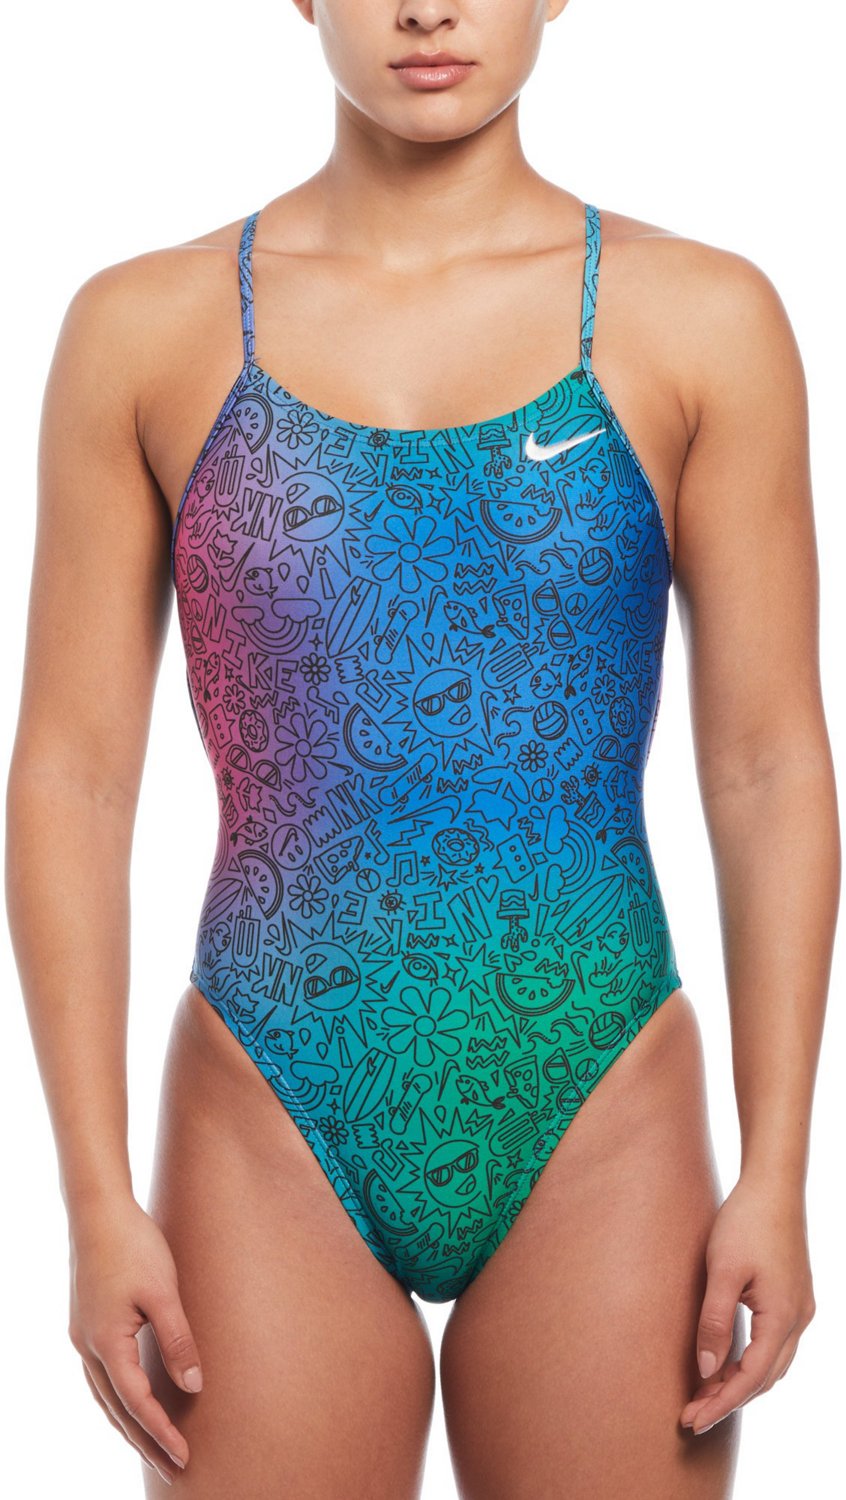 Nike Women's HydraStrong Multi-Print Lace Up Tie Back One Piece